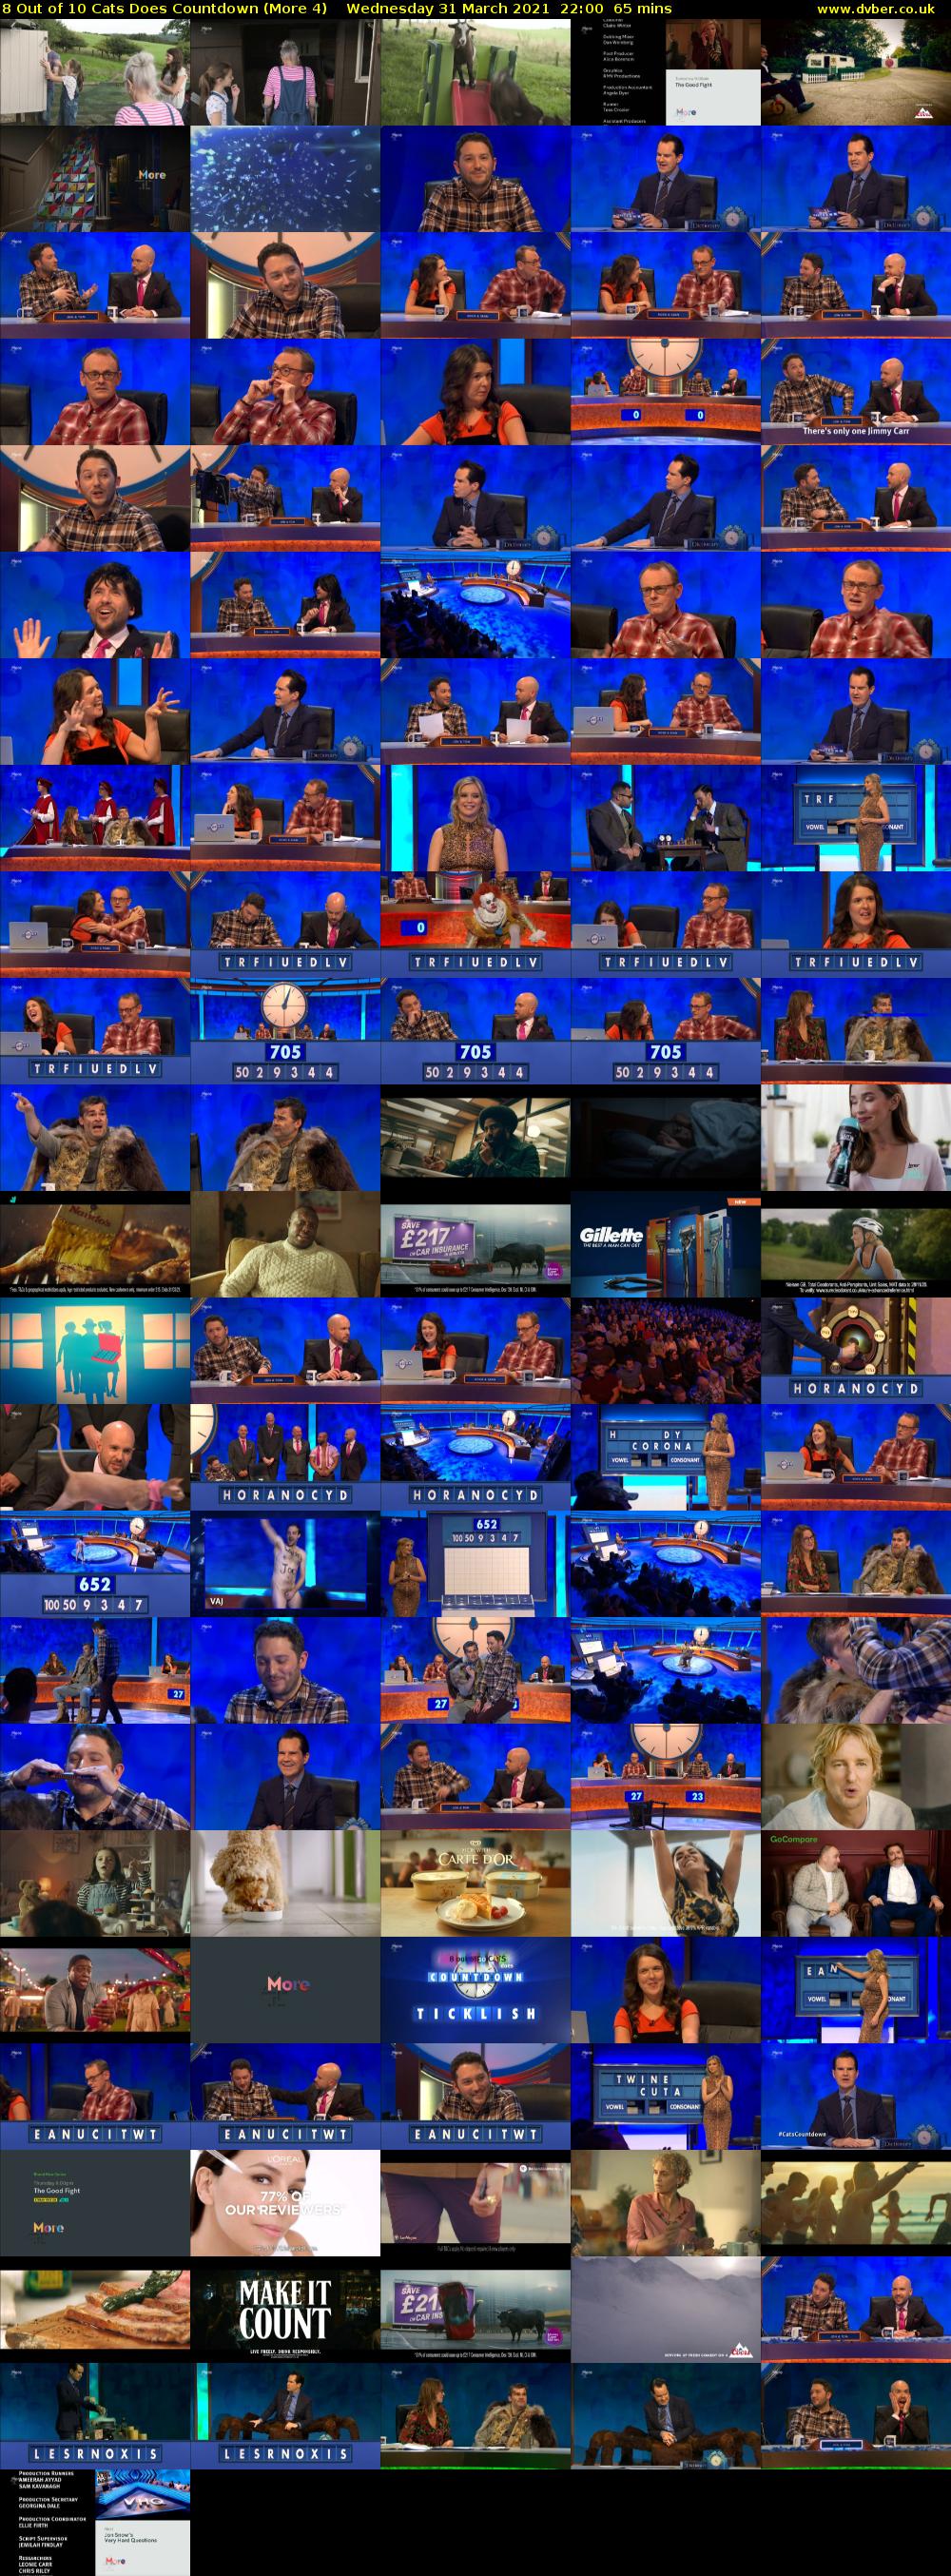 8 Out of 10 Cats Does Countdown (More 4) Wednesday 31 March 2021 22:00 - 23:05